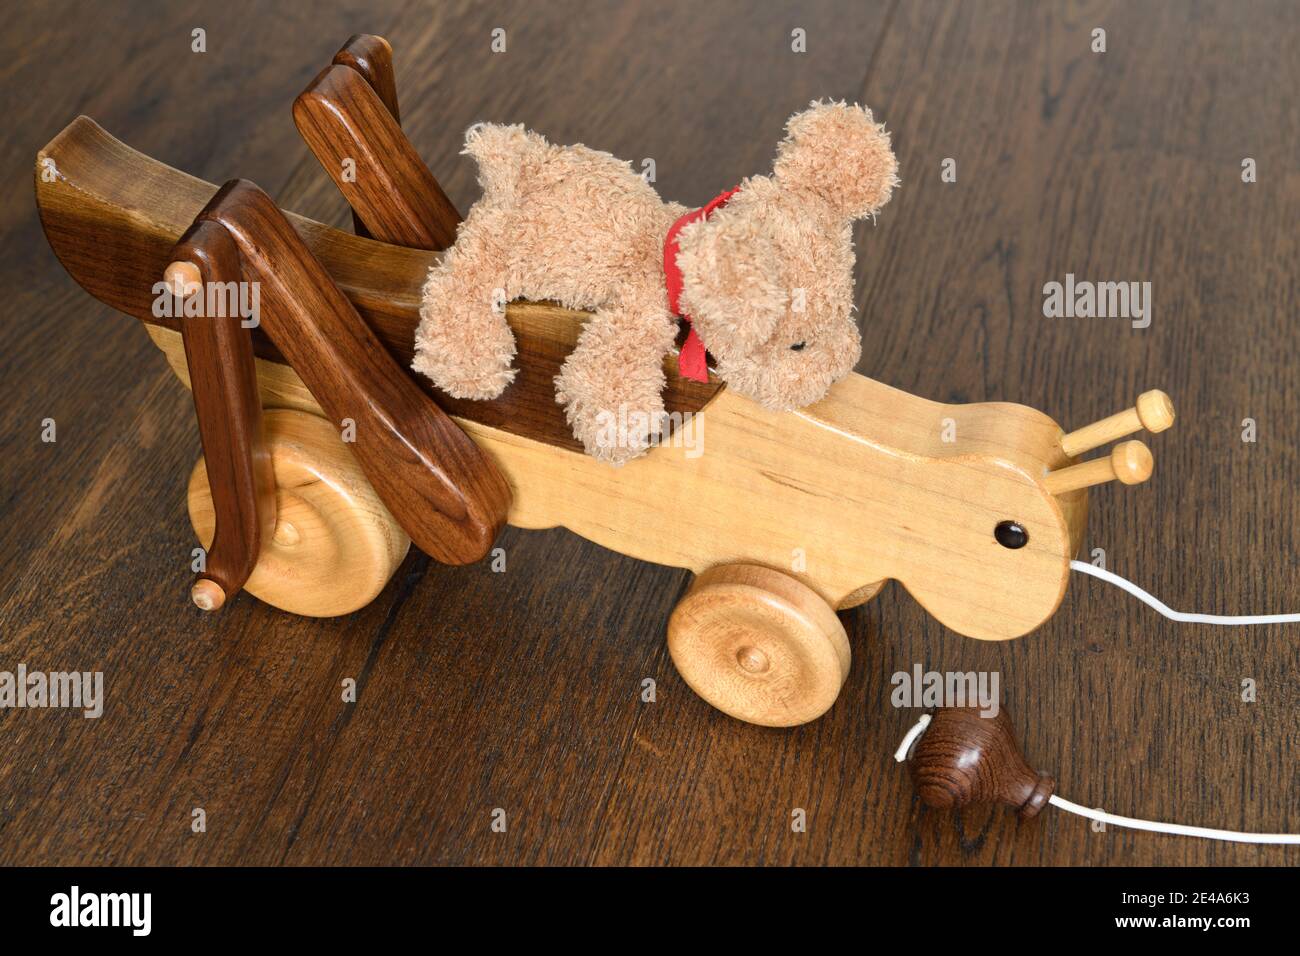 Handcrafted wood cricket with teddy bear riding up top on hardwood floor Stock Photo